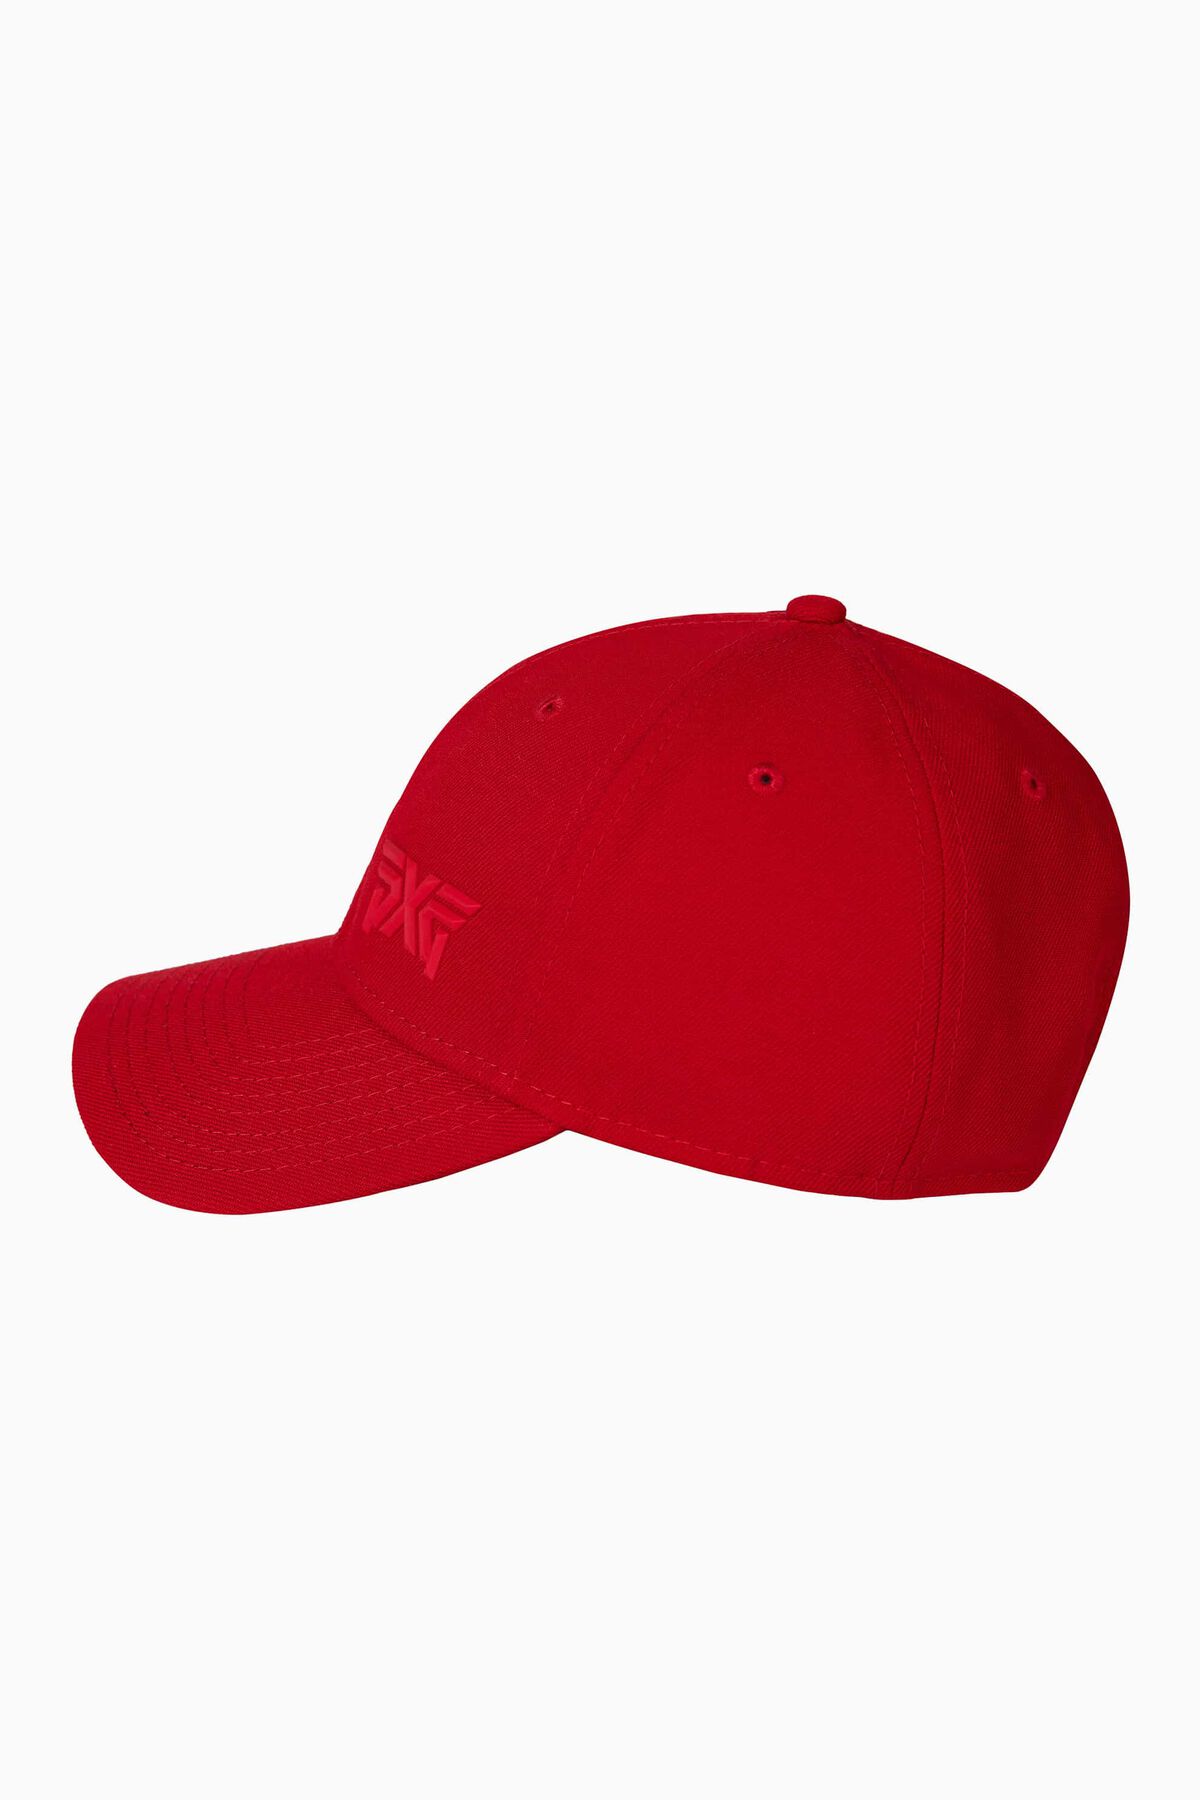 Haute Red 9FORTY Adjustable Cap 